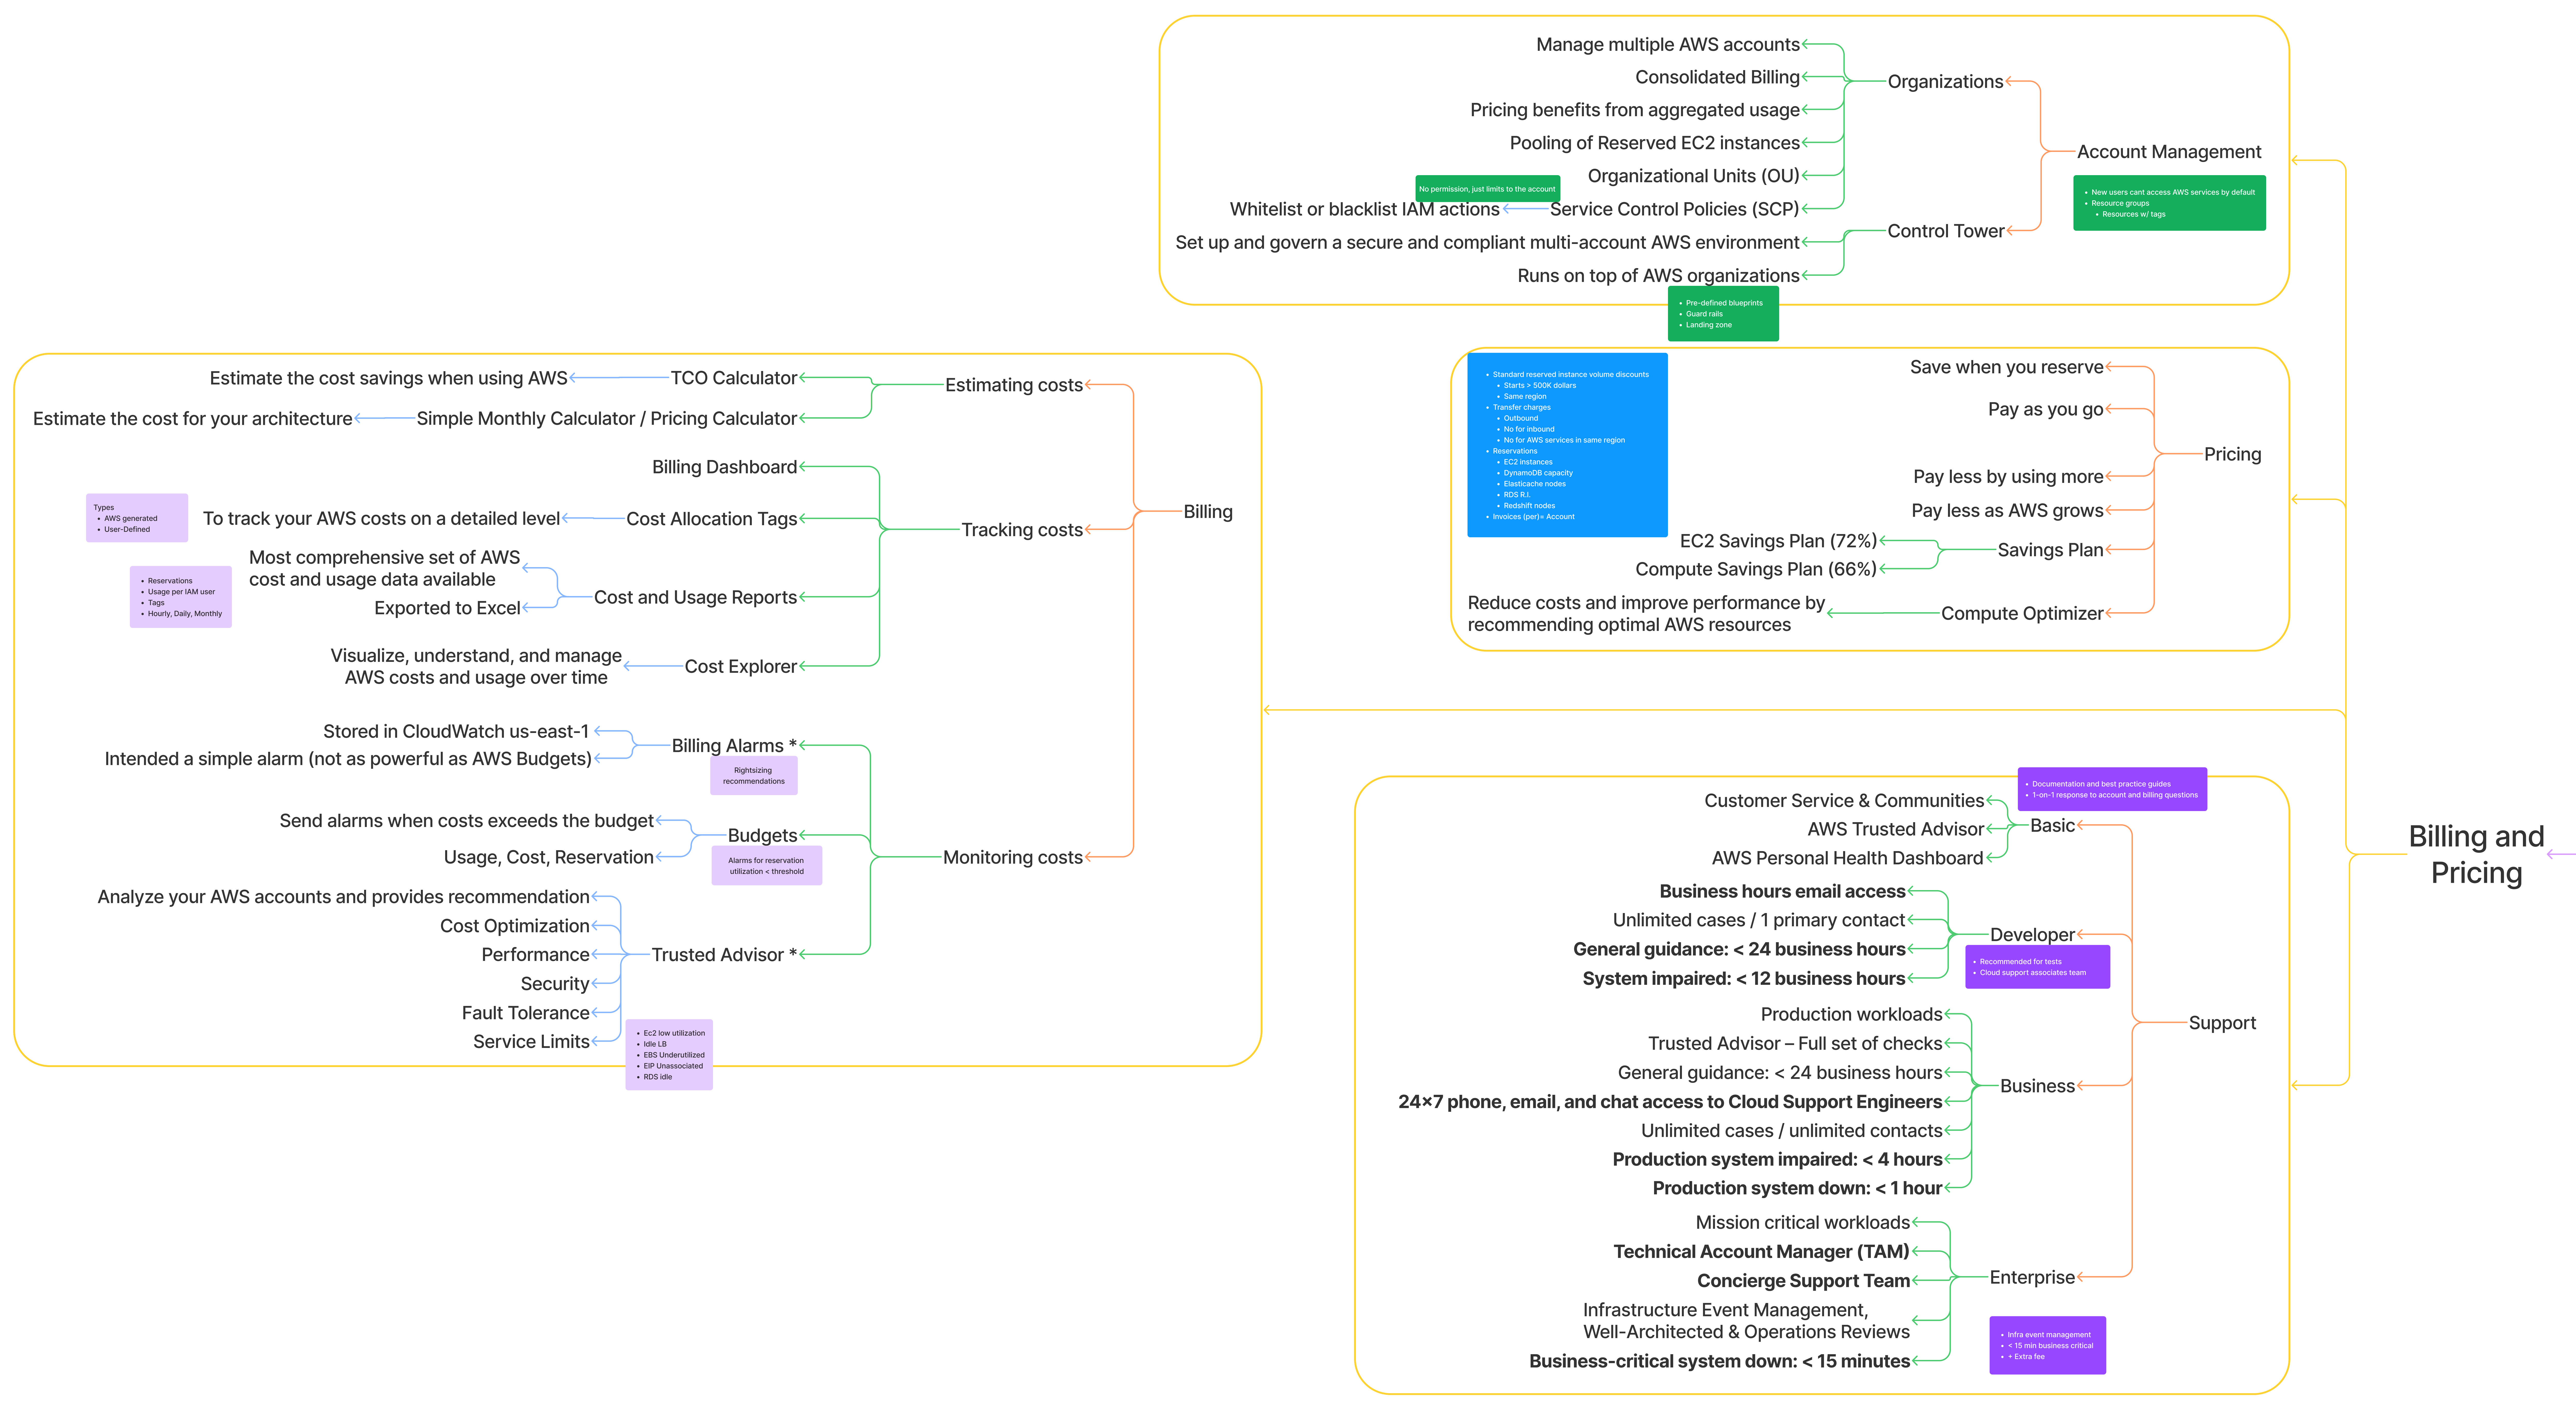 Mind Map - Billing and Pricing